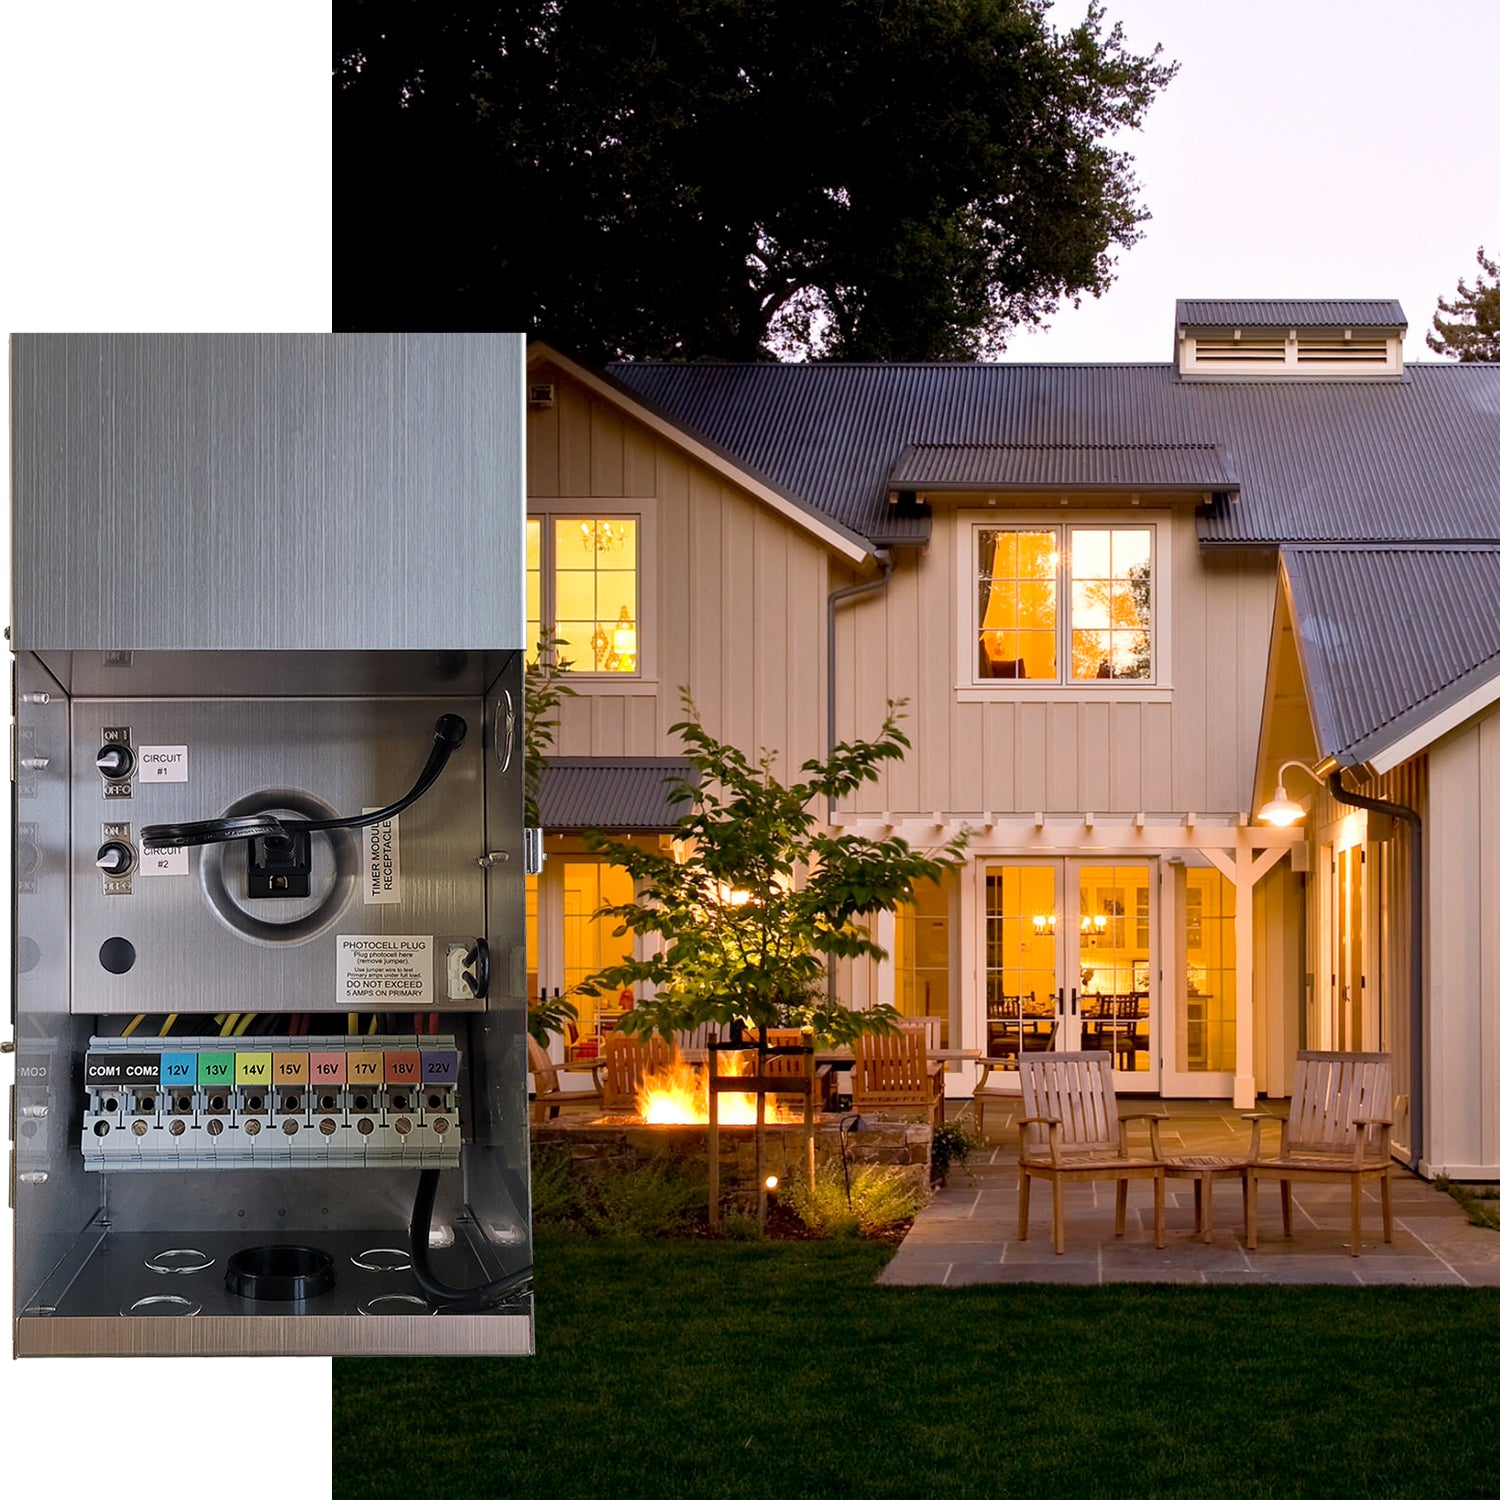 Close-up of COLOER 600W multi-tap low voltage transformer COT703S with voltage settings from 12V to 22V, alongside a beautifully illuminated residential garden at dusk